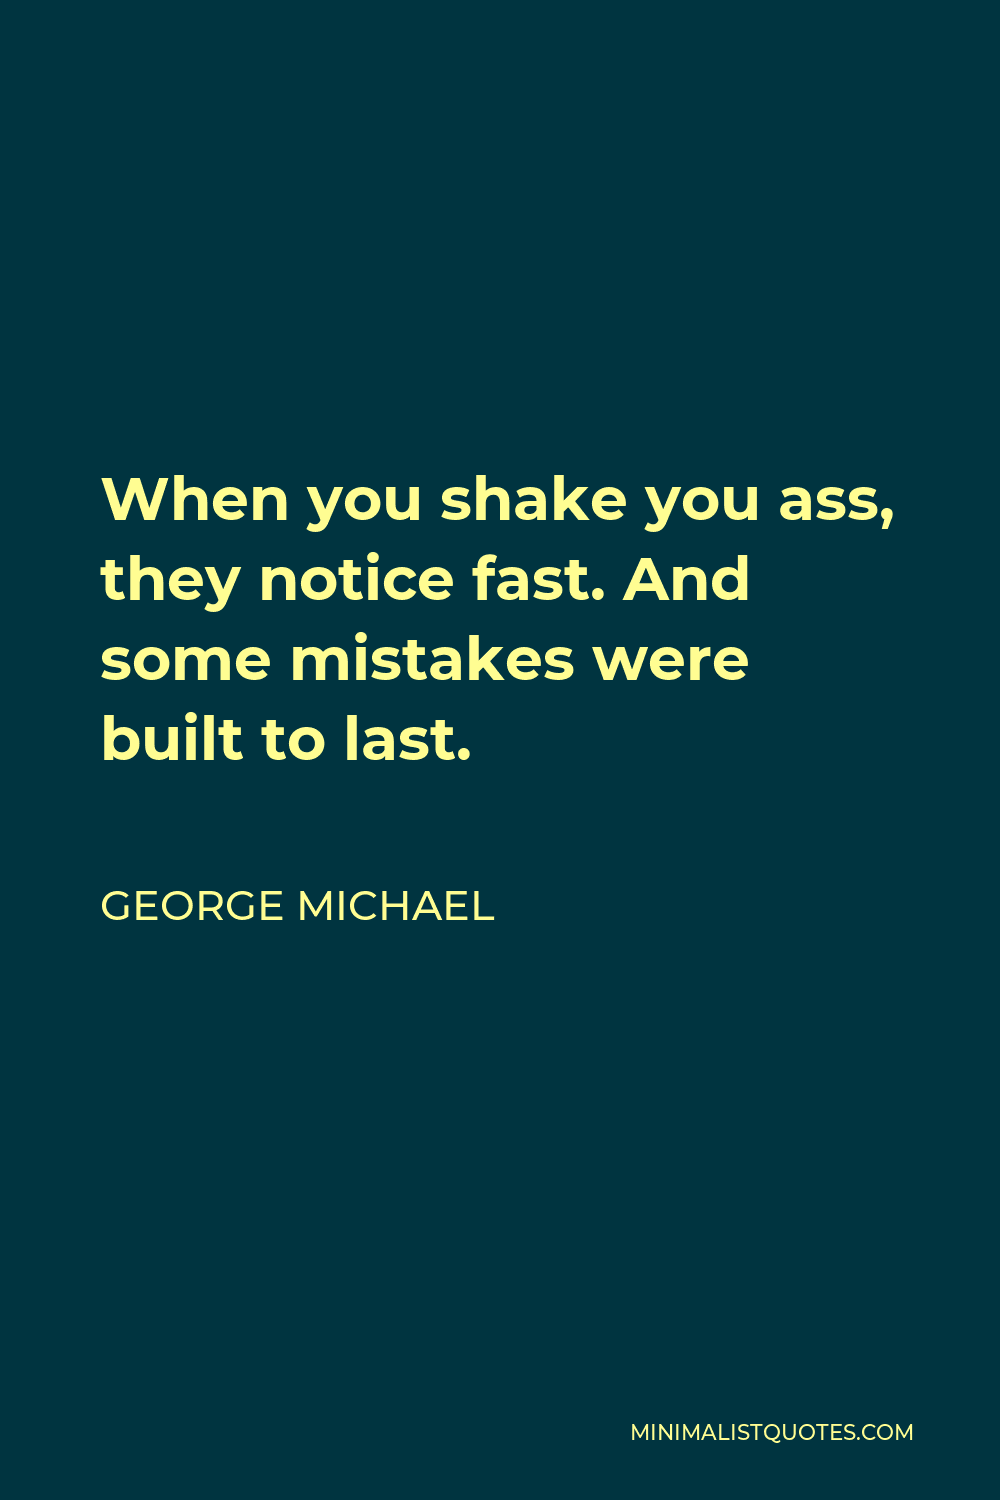 George Michael Quote - When you shake you ass, they notice fast. And some mistakes were built to last.